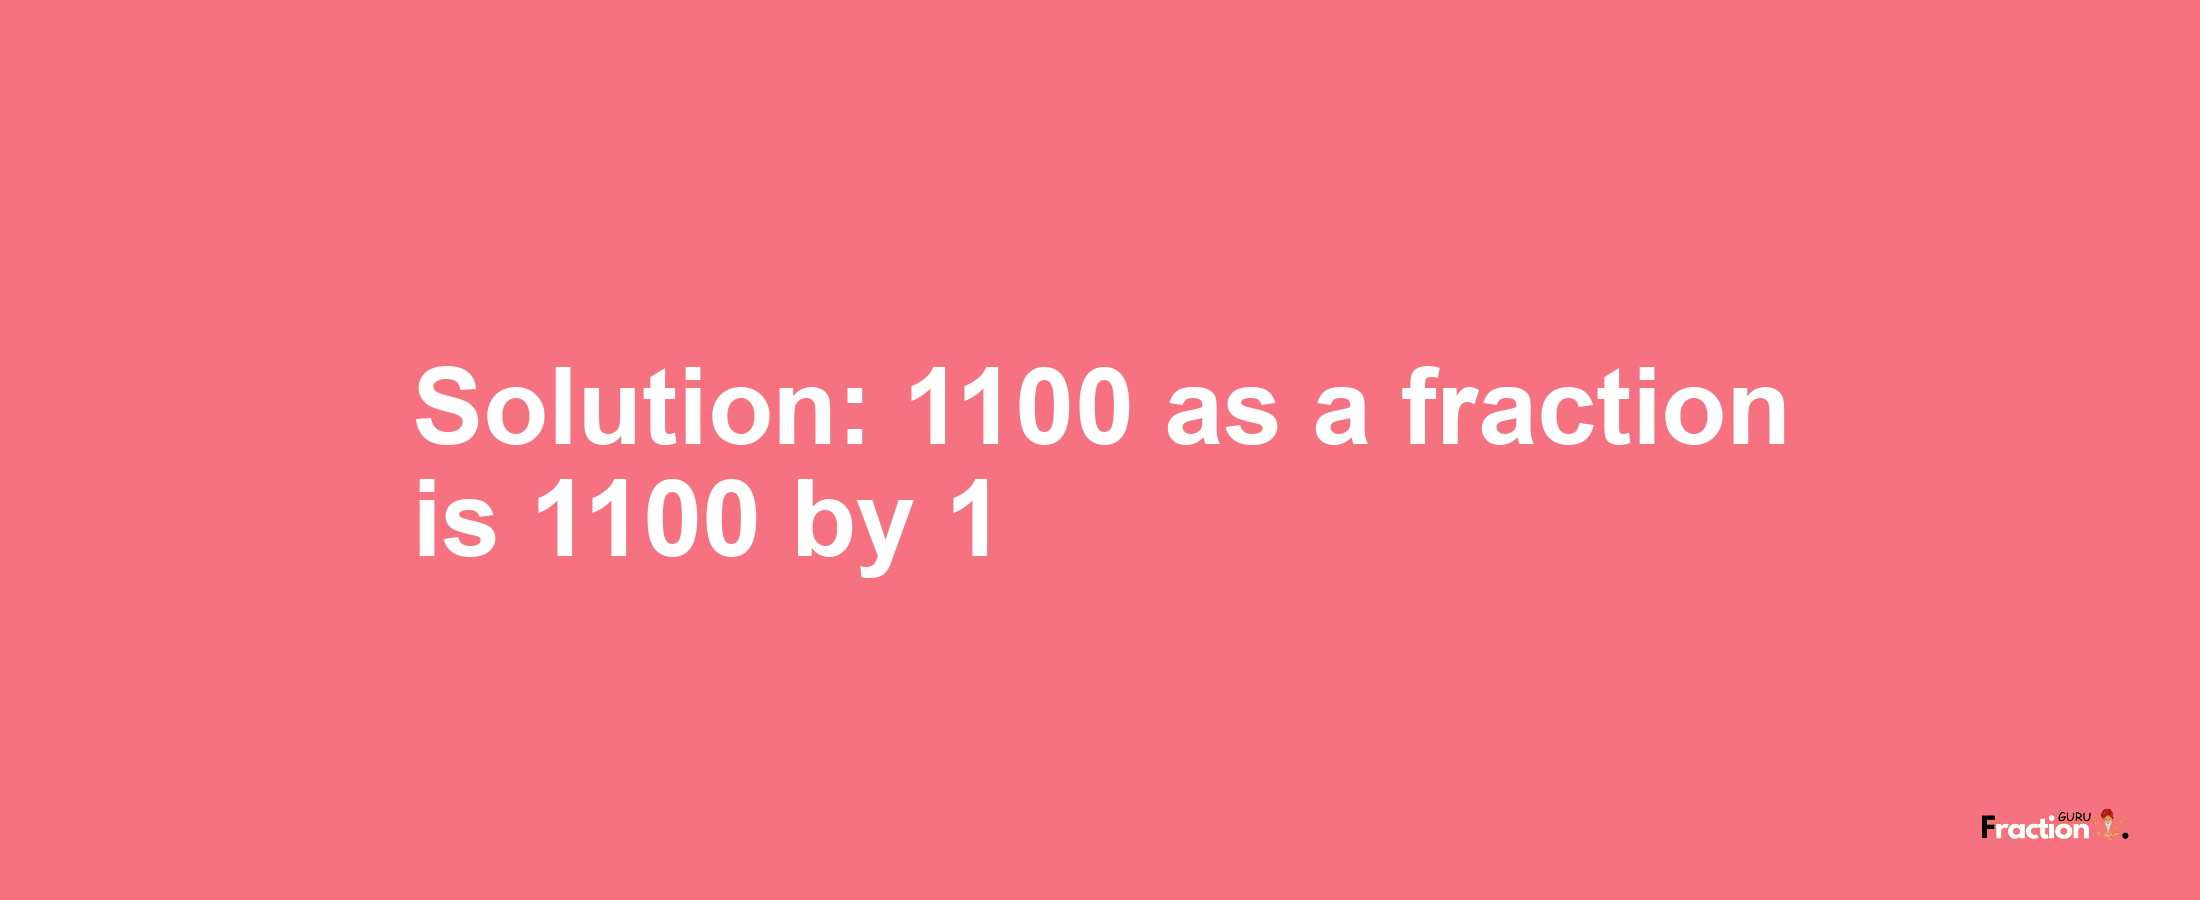 Solution:1100 as a fraction is 1100/1